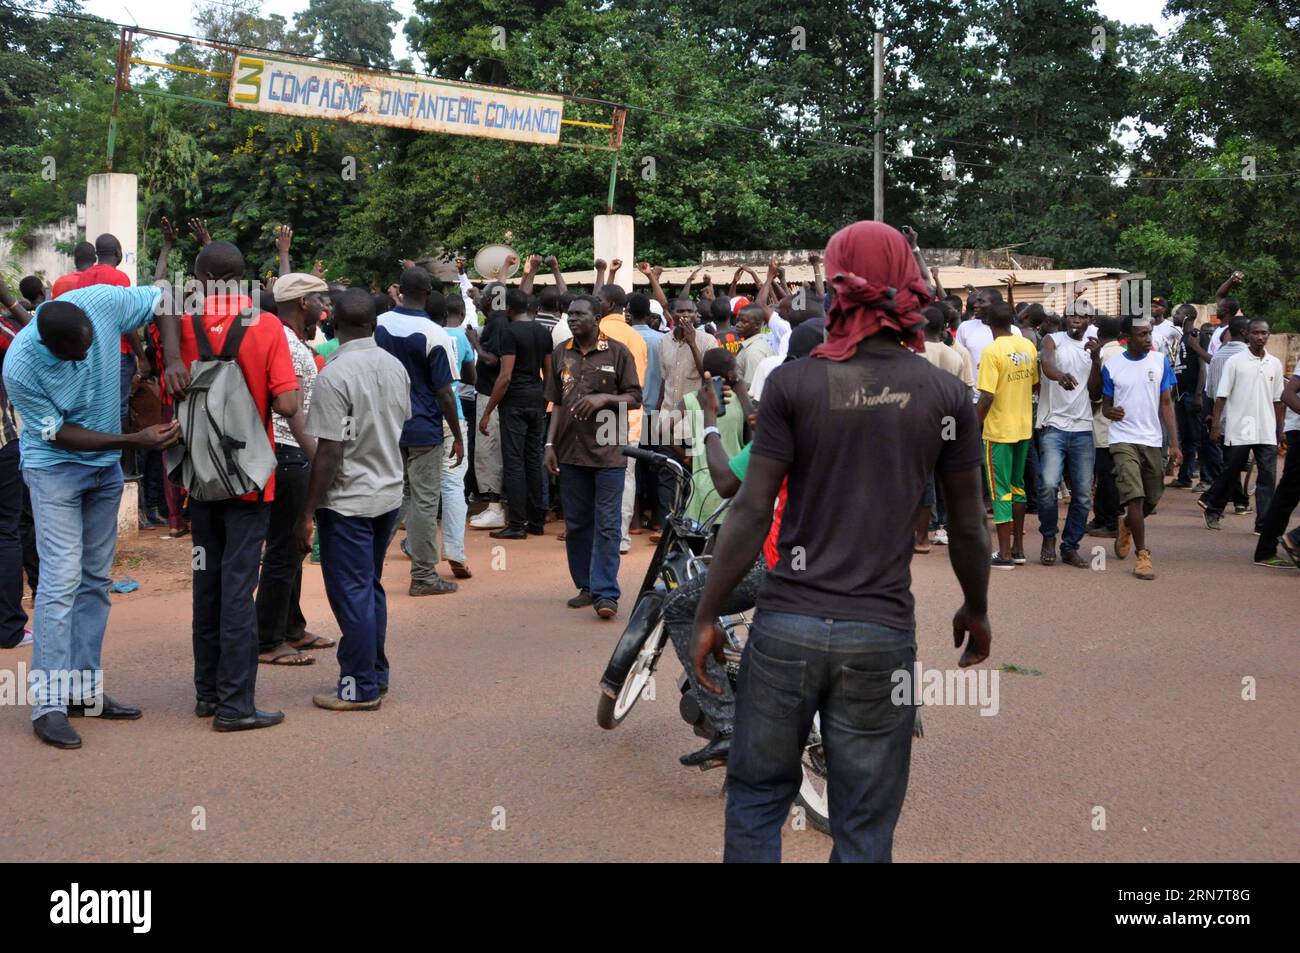 Youths living in Banfora town take part in a demonstration against the Presidential Guard seizing power in a coup in Banfora, located 425km west of Ouagadougou, the capital of Burkina Faso, Sept. 17, 2015. ) BURKINA FASO-OUAGADOUGOU-DEMONSTRATION RemixZoeringre PUBLICATIONxNOTxINxCHN   Youths Living in  Town Take Part in a Demonstration against The Presidential Guard seizing Power in a Coup in  Located  WEST of Ouagadougou The Capital of Burkina Faso Sept 17 2015 Burkina Faso Ouagadougou Demonstration RemixZoeringre PUBLICATIONxNOTxINxCHN Stock Photo